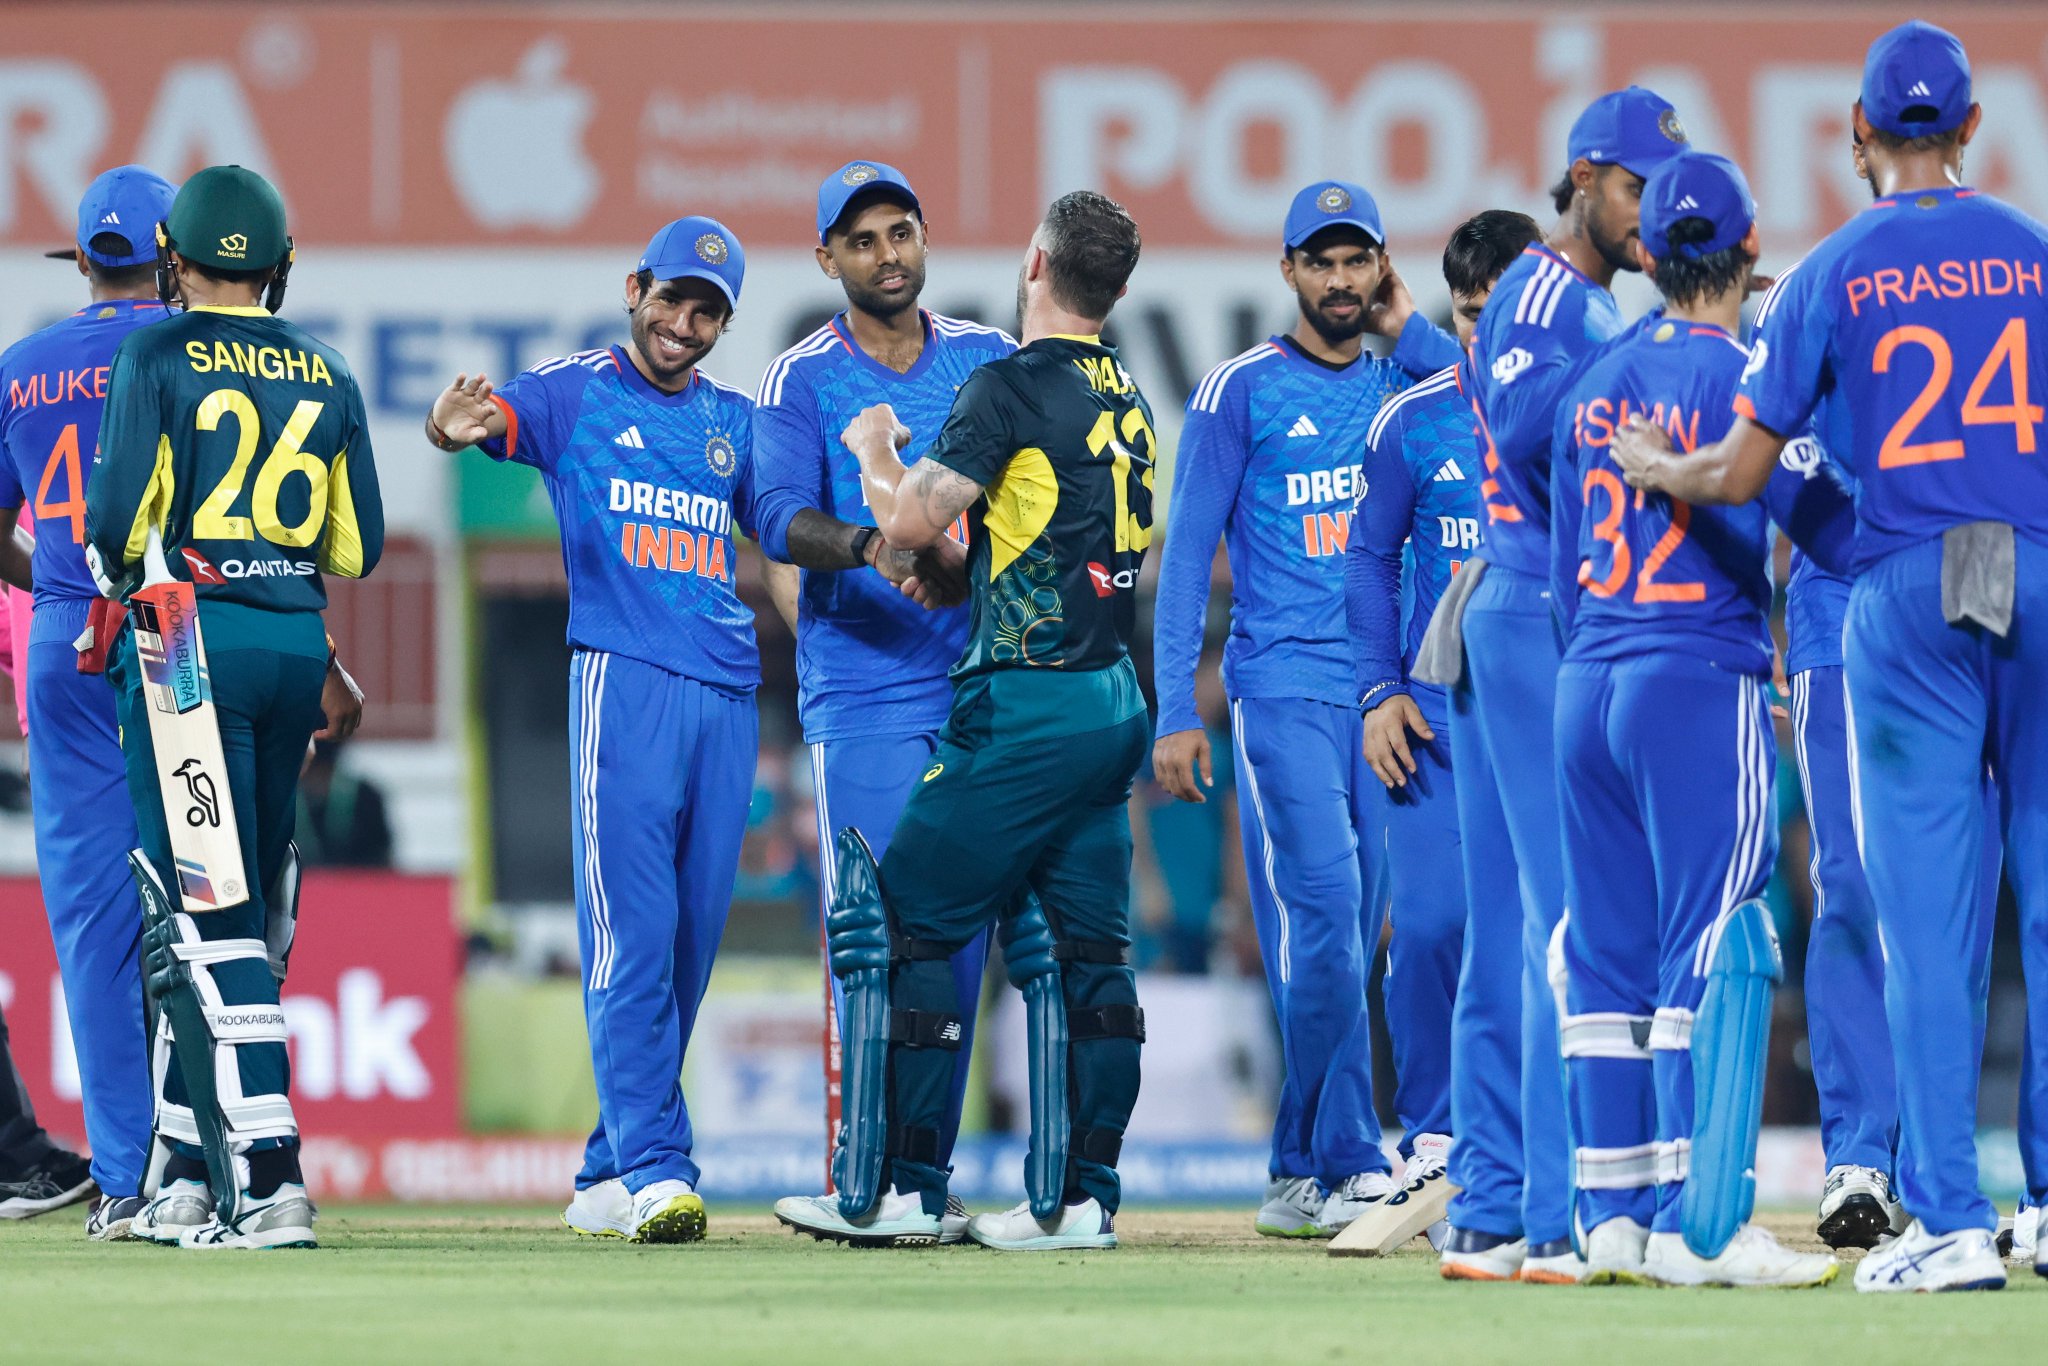 All-round India beat Australia by 44 runs to take 2-0 lead in five-match T20I series